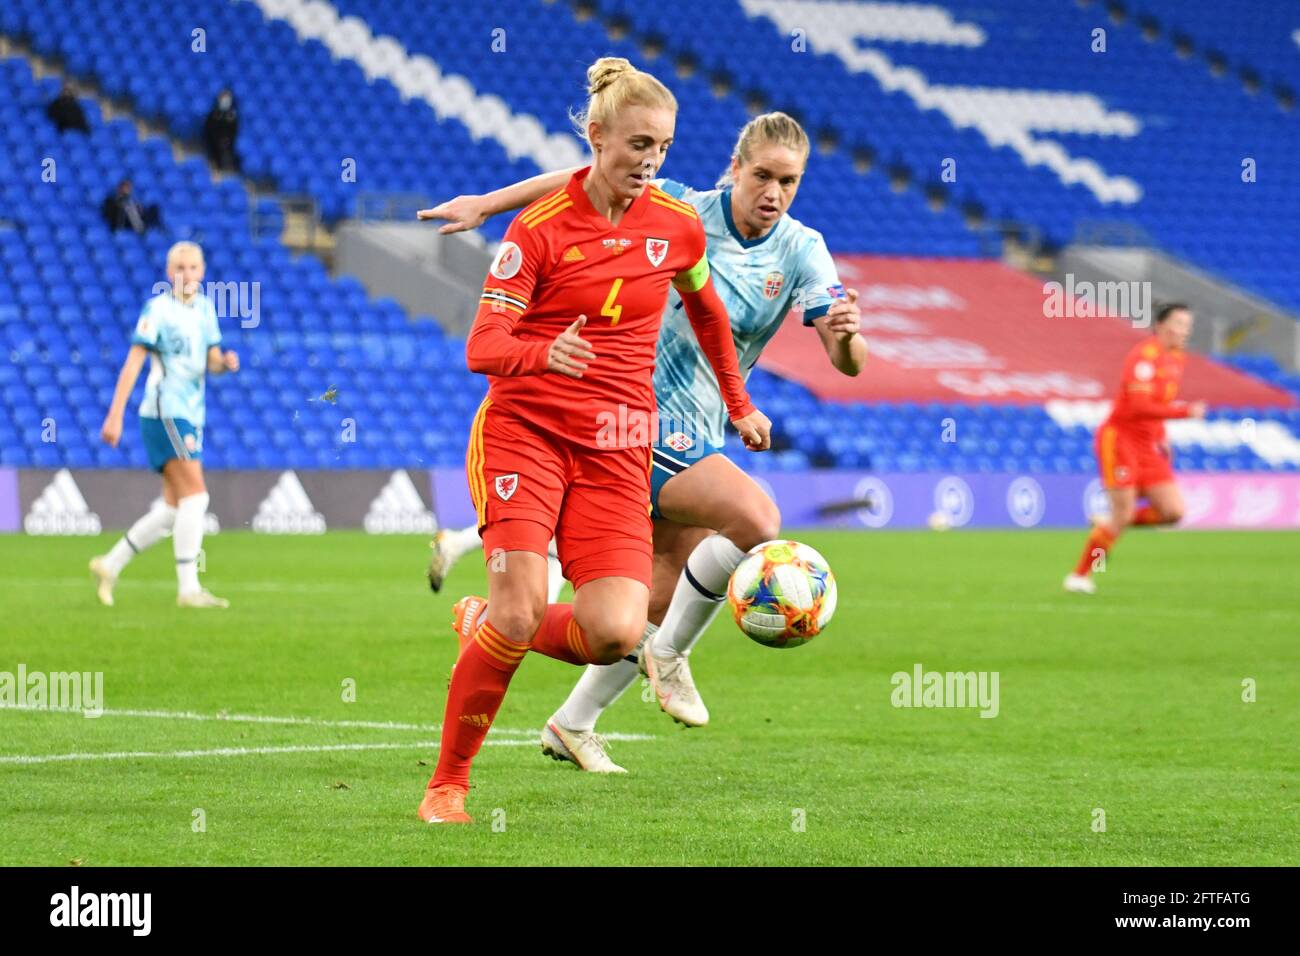 Cardiff, Wales. 27 October, 2020. Sophie Ingle of Wales Women under pressure from Elise Thorsnes of Norway Women during the UEFA Women's European Championship 2020 Qualifying Group C match between Wales Women and Norway Women at the Cardiff City Stadium in Cardiff, Wales, UK on 27, October 2020. Credit: Duncan Thomas/Majestic Media. Stock Photo